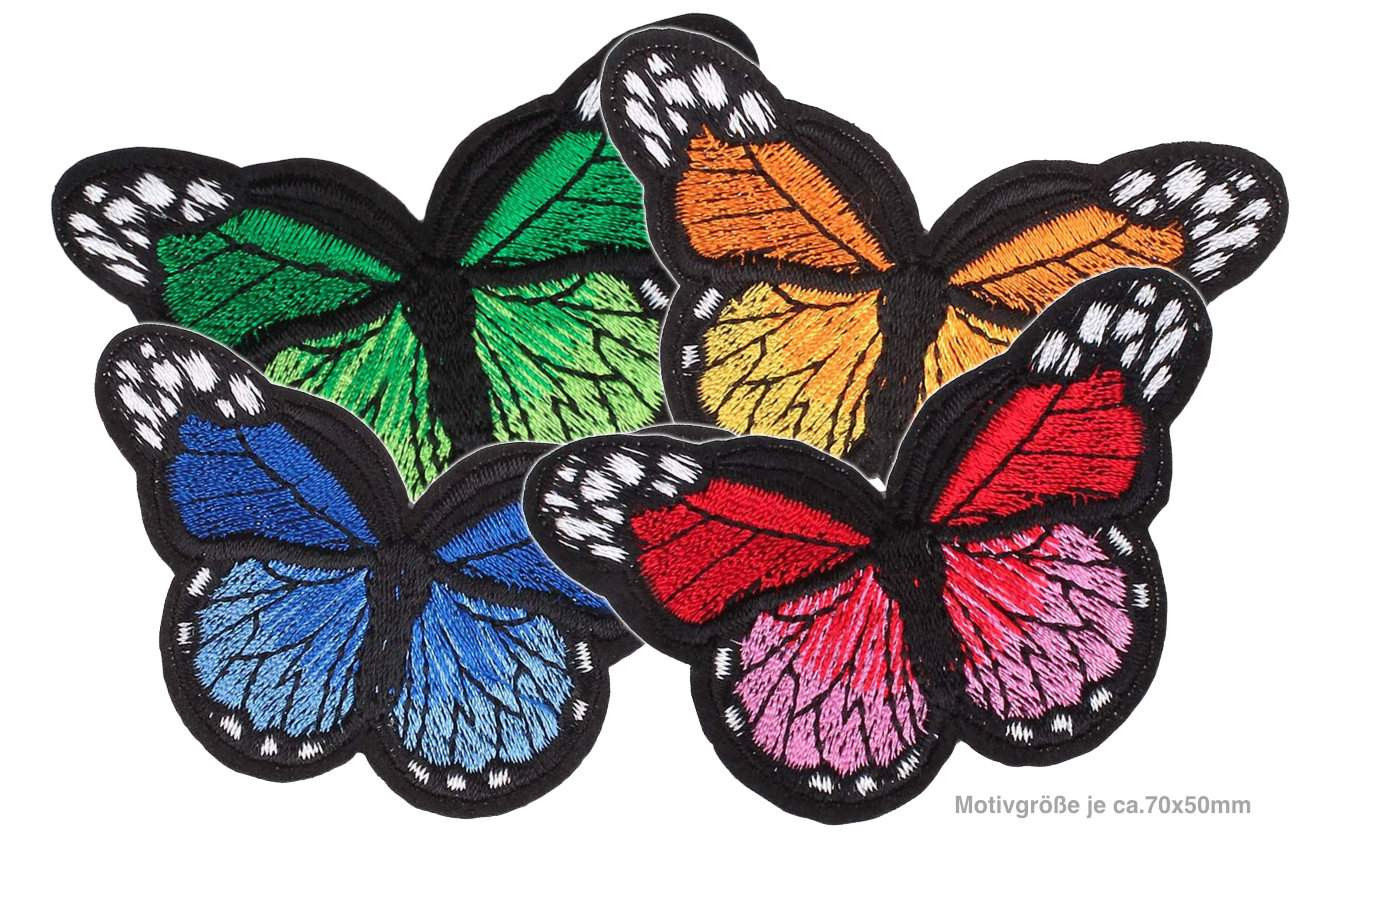 Patch, Embroidered Patch (Iron-On or Sew-On), Colorful Rainbow Butterfly,  4 x 4